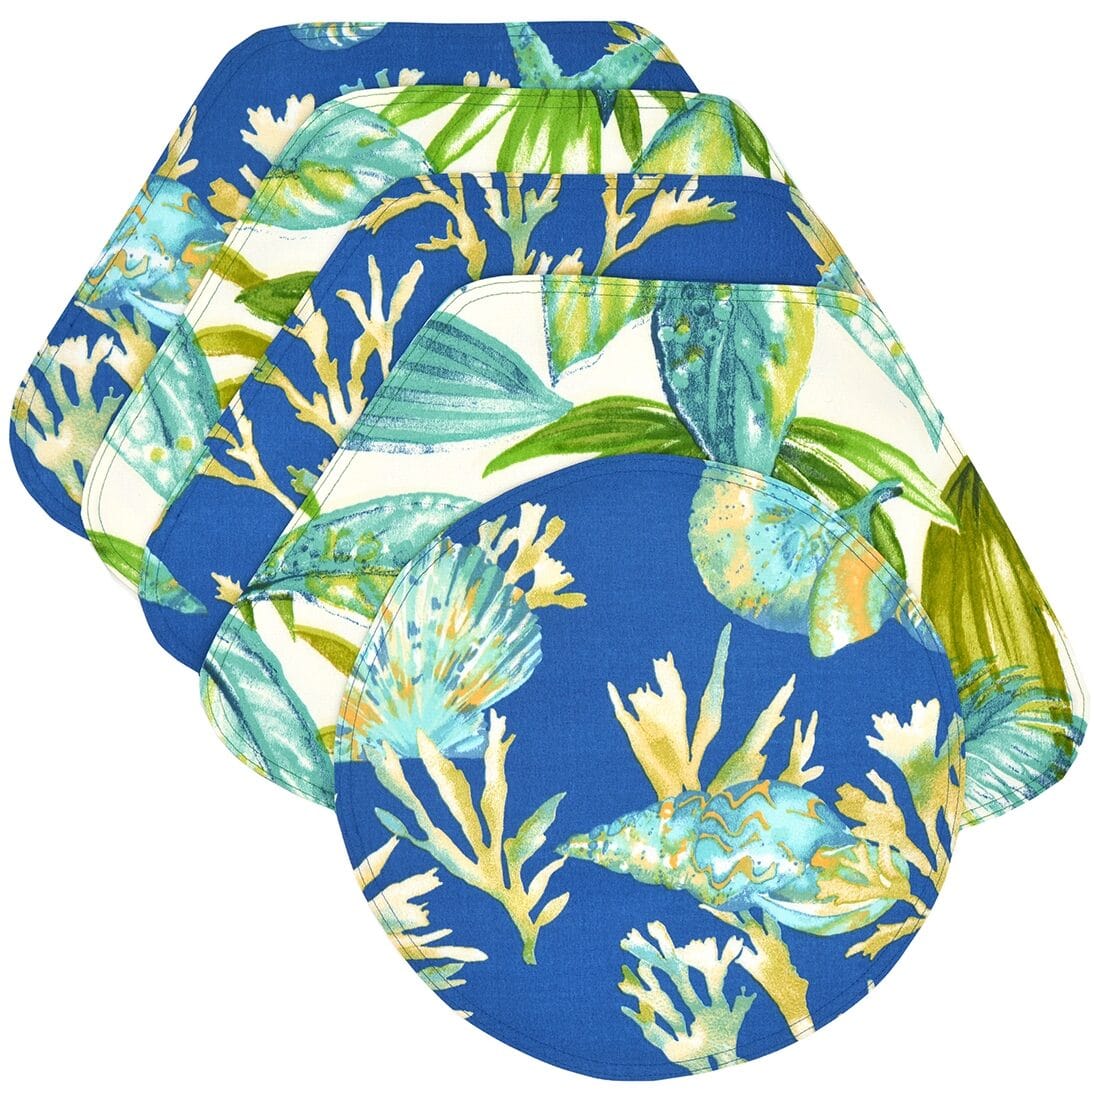 Blue Seashell & Tropical Leaf Outdoor Fabric Wedge-Shaped Placemats ...